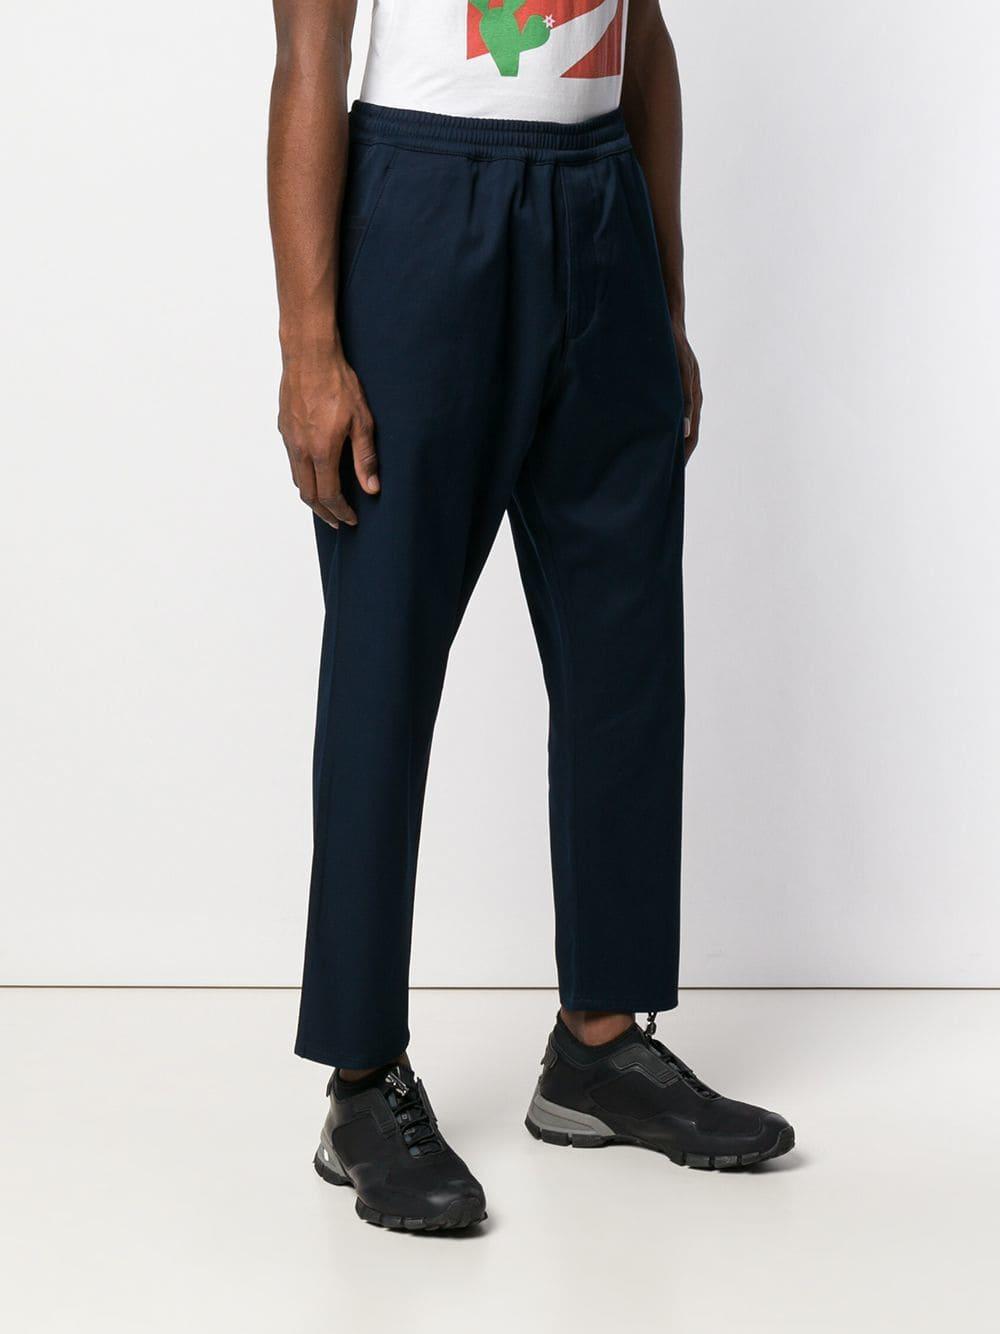 Prada Tapered Trousers in Blue for Men - Lyst